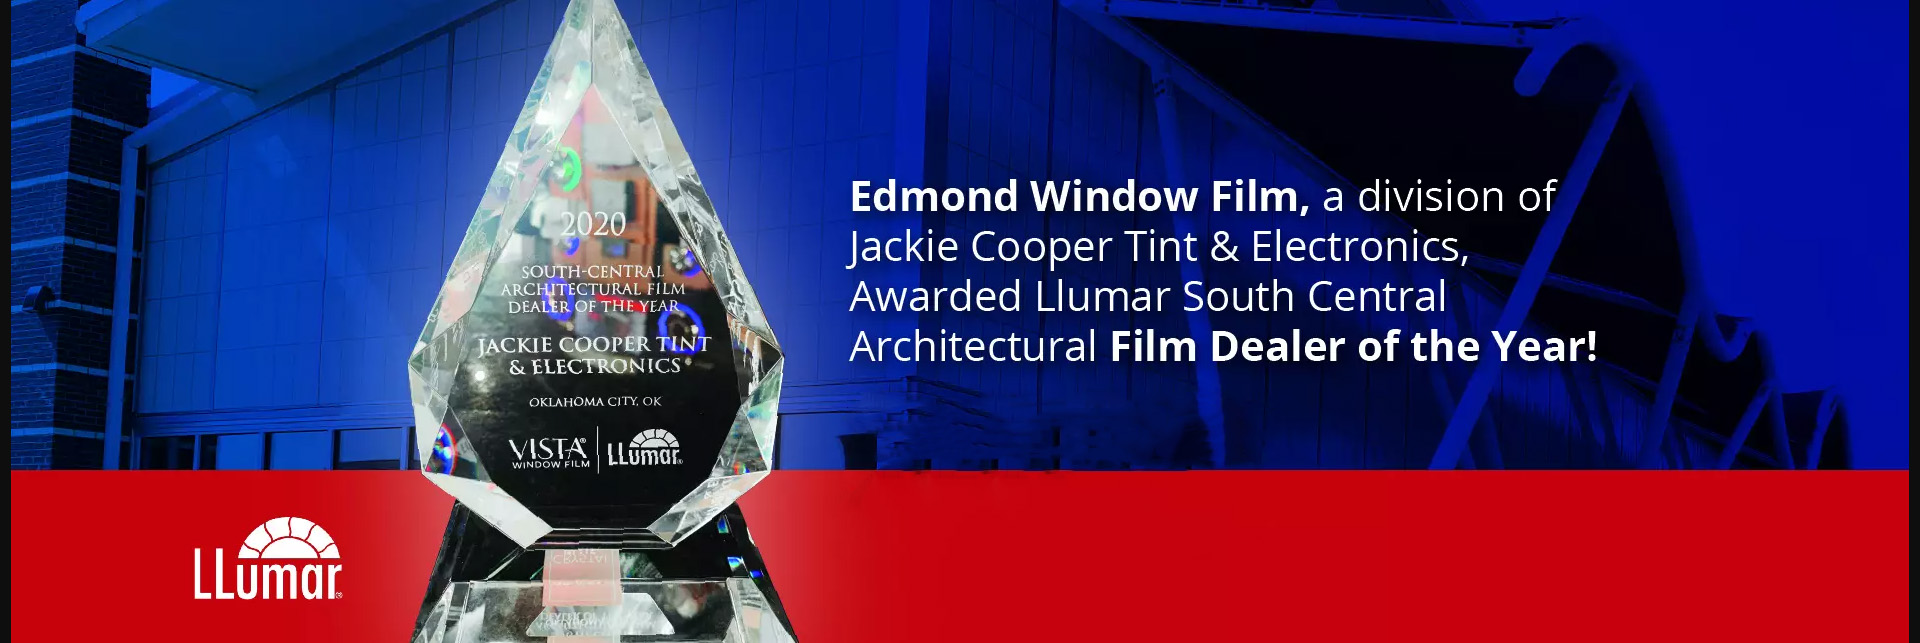 Edmond Window Film, a division of Jackie Cooper Tint & Electronics, Awarded Llumar South Central Architectural Film Dealer of the Year!